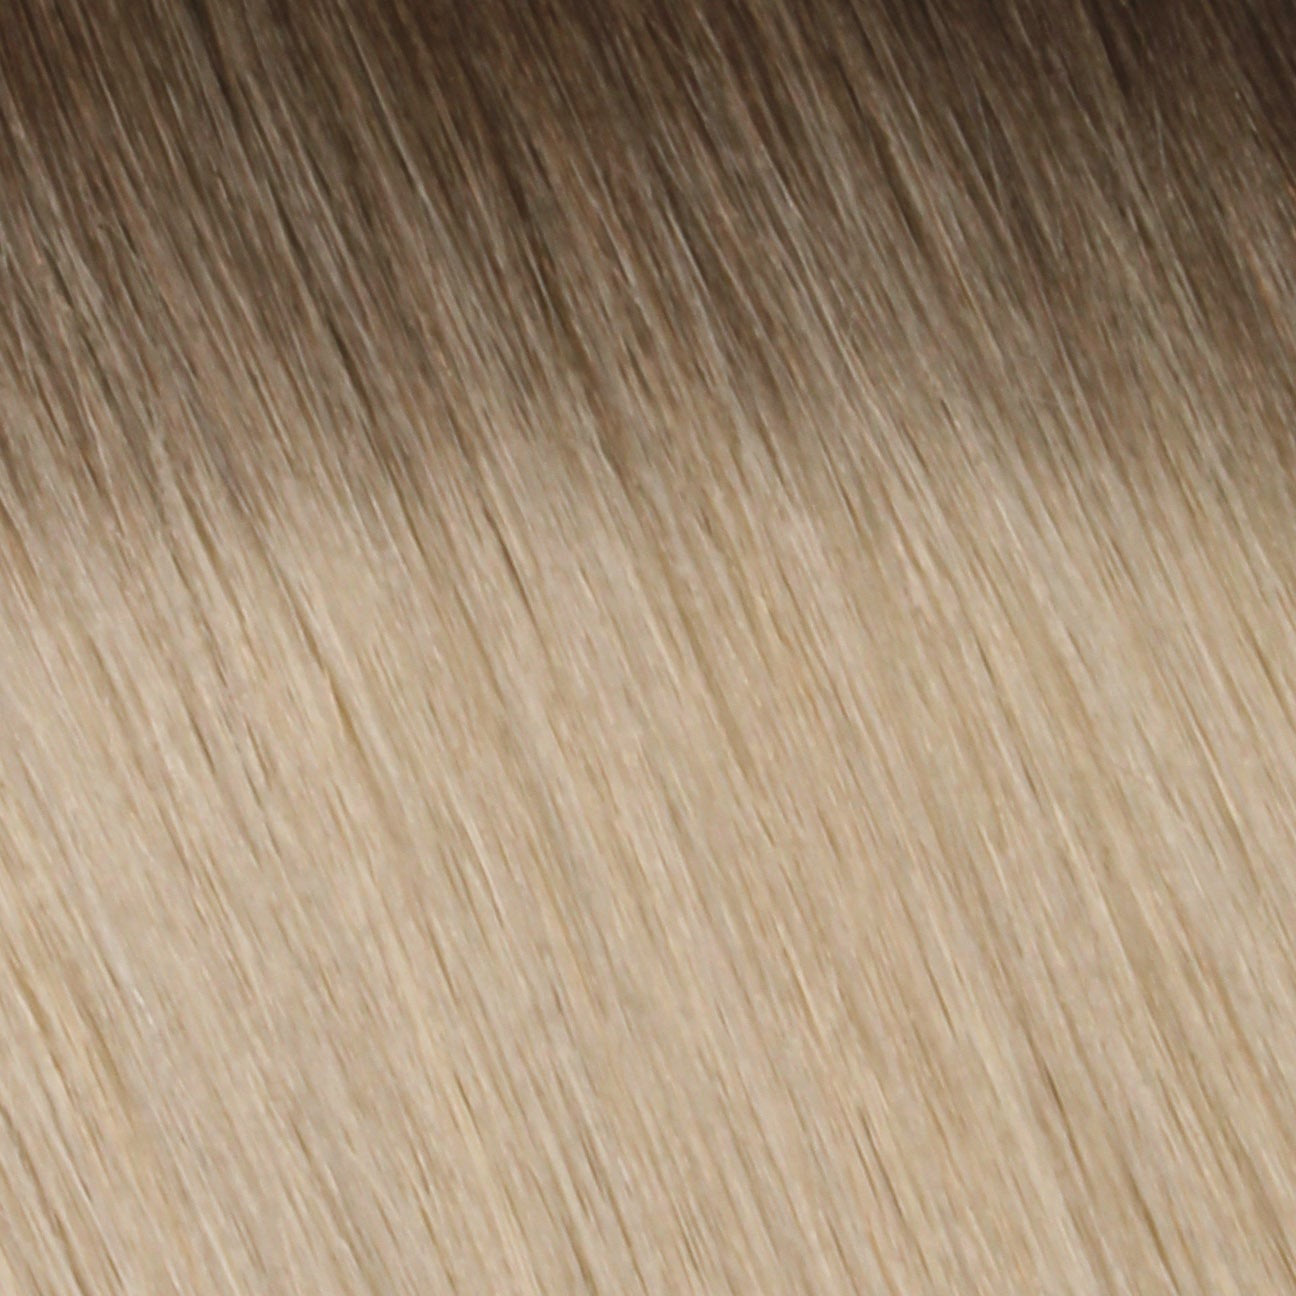 Nano Bonds 18 Inches - SWAY Hair Extensions Rooted-Hollywood-Ash-Blonde-R5-18A-613A Ultra-fine, invisible bonds for a flawless, natural look. 100% Remy Human hair, lightweight and versatile. Reusable and perfect for individual or salon use.